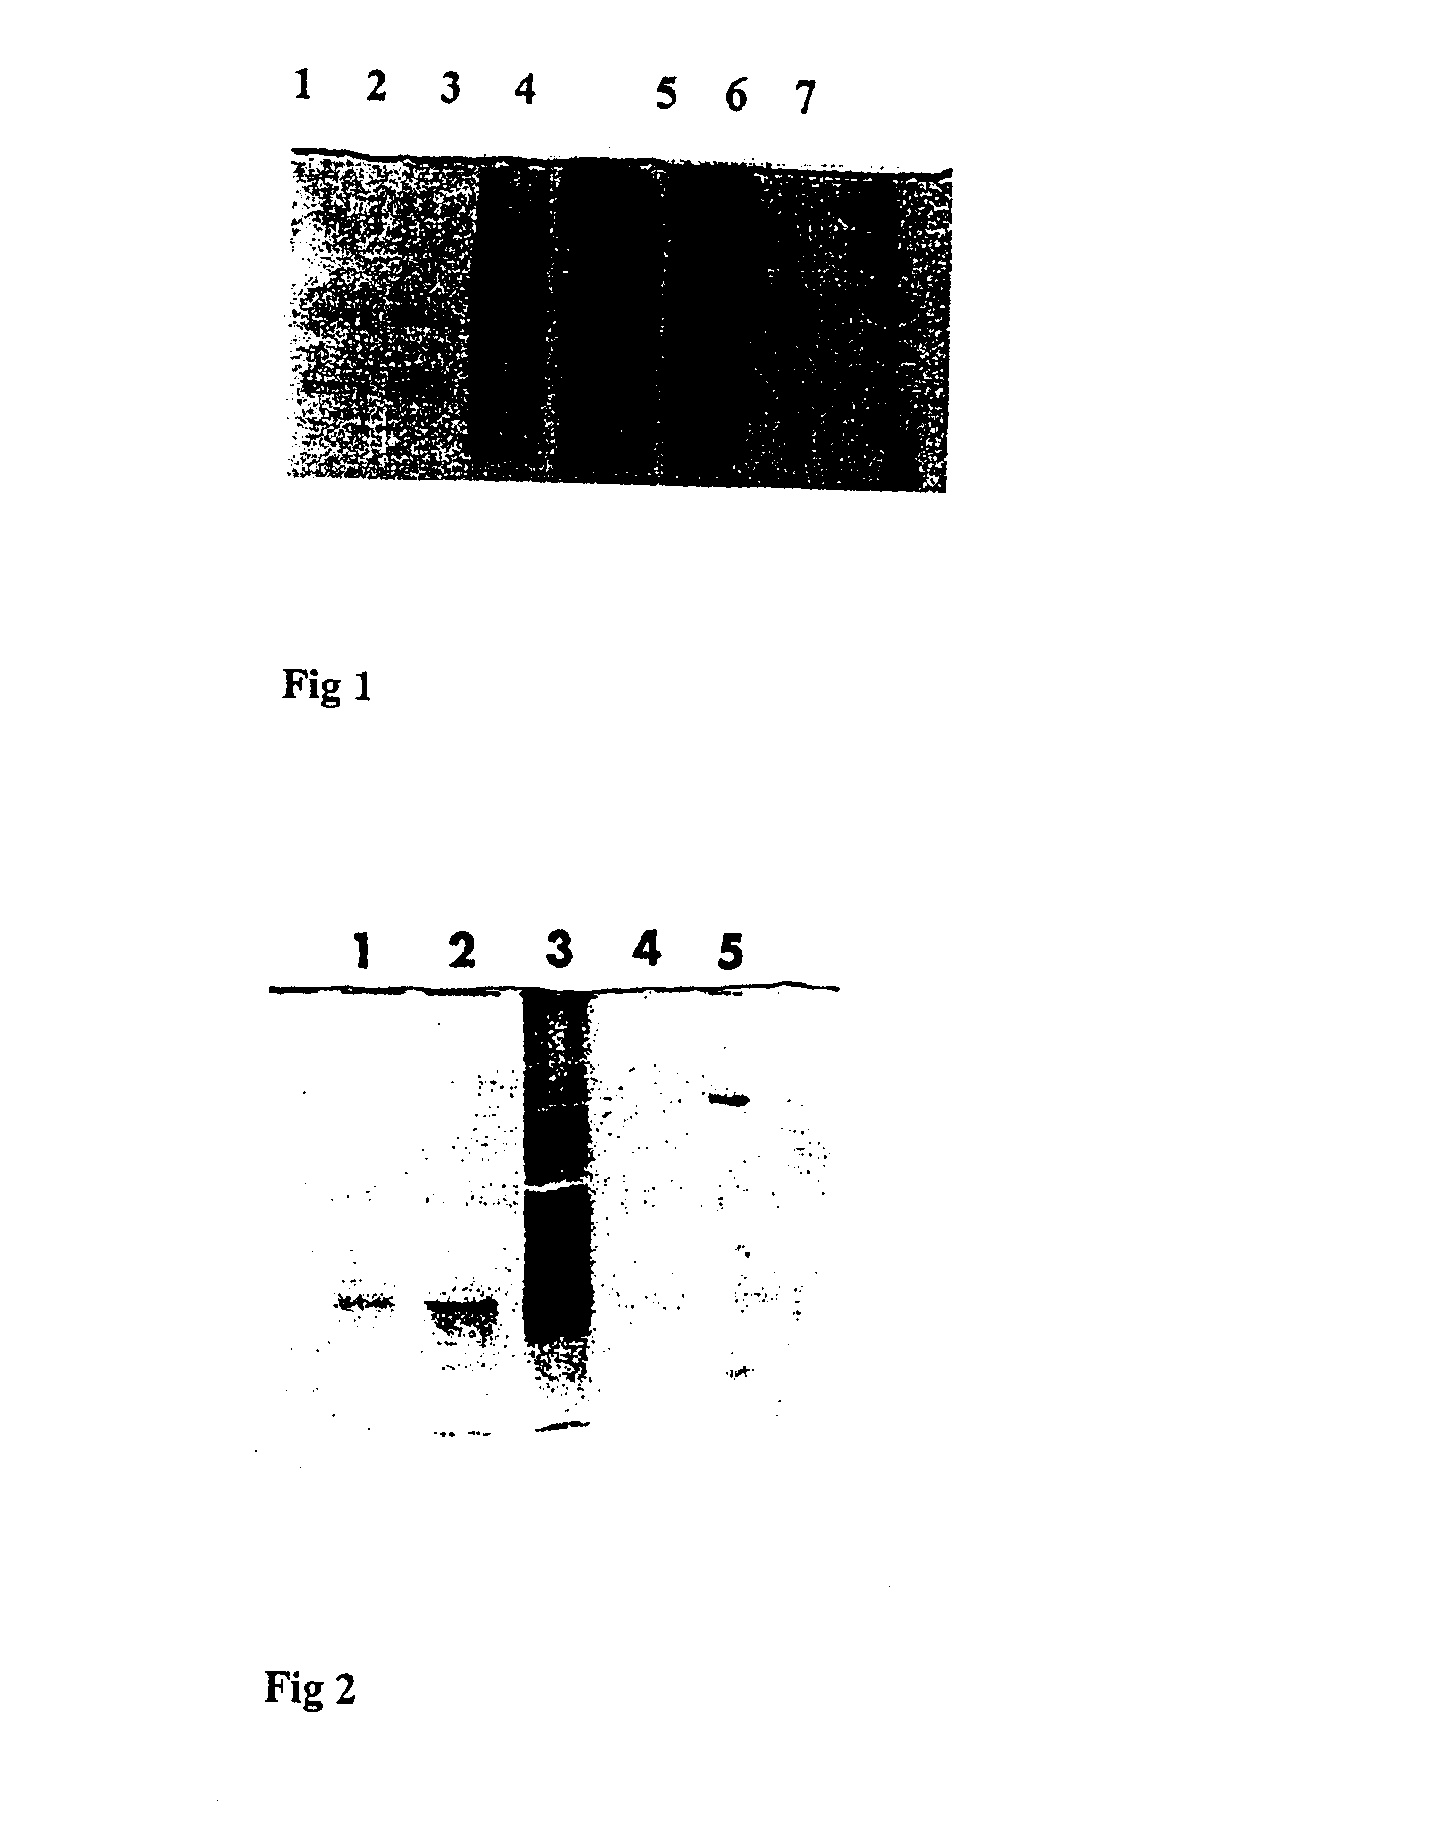 Protein profiling of hyper acidic plants and high protein extraction compositions thereof